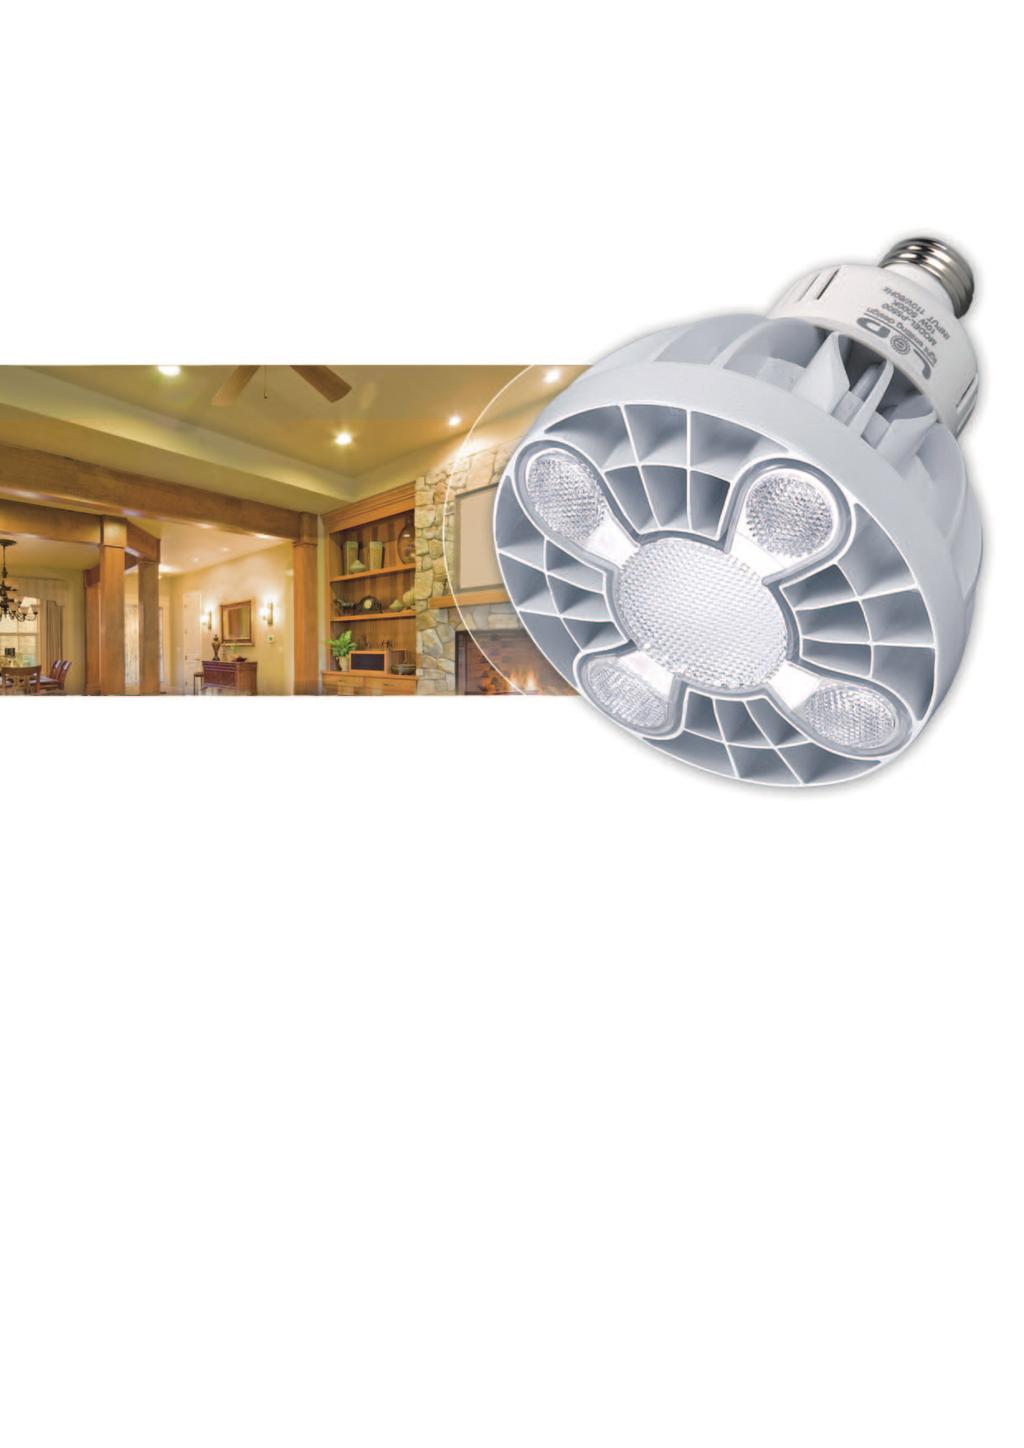 P5500 LED Architectural Downlighting HIGH TECH ENERGY EFFICIENT DESIGN